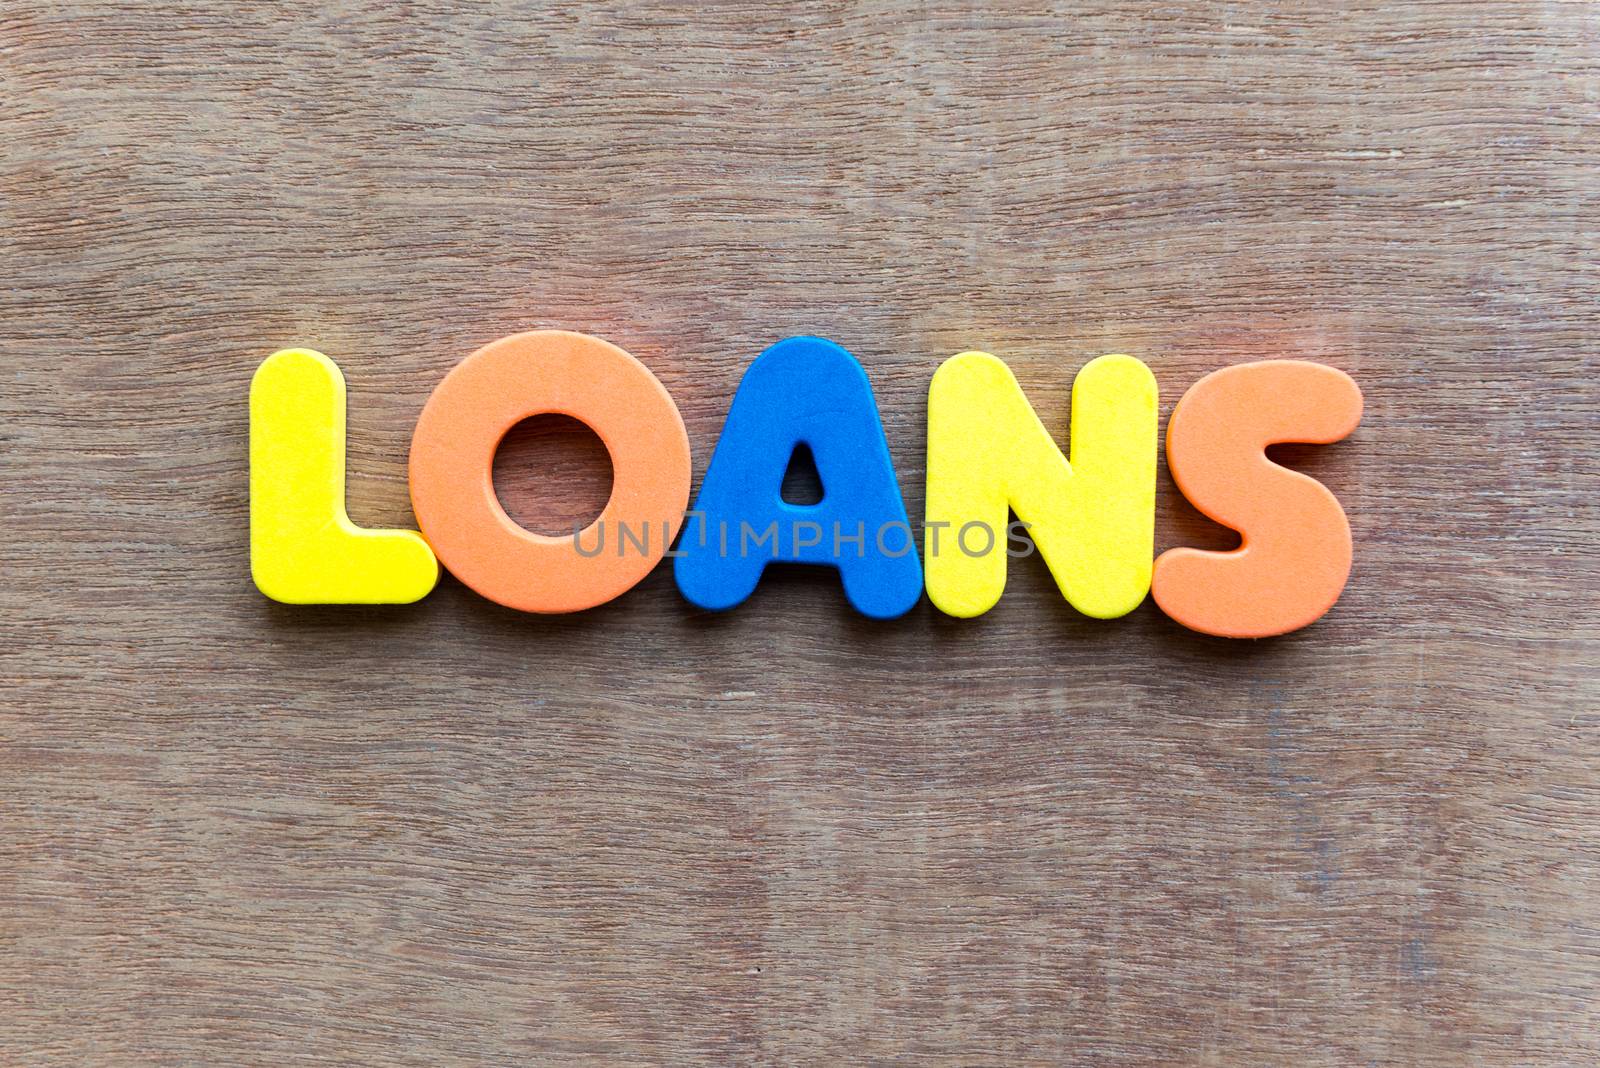 loans colorful word in the wooden background